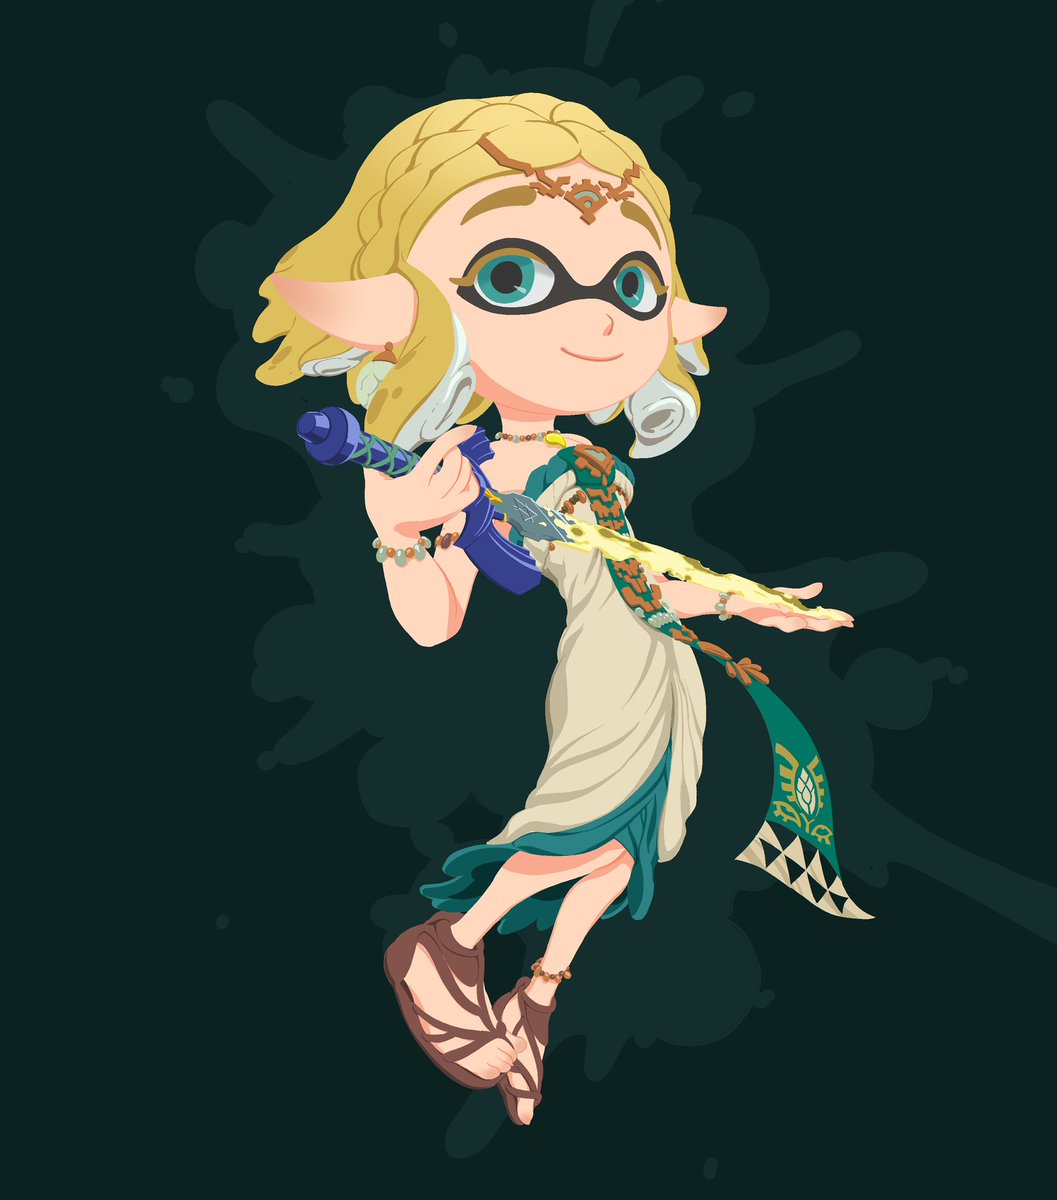 I know this Zelda’s been mixed with Splatoon before, but couldn’t remember if I’d seen a Zonai one.. #Zelda #ティアキン #スプラ #スプラトゥーン #Splatoon3